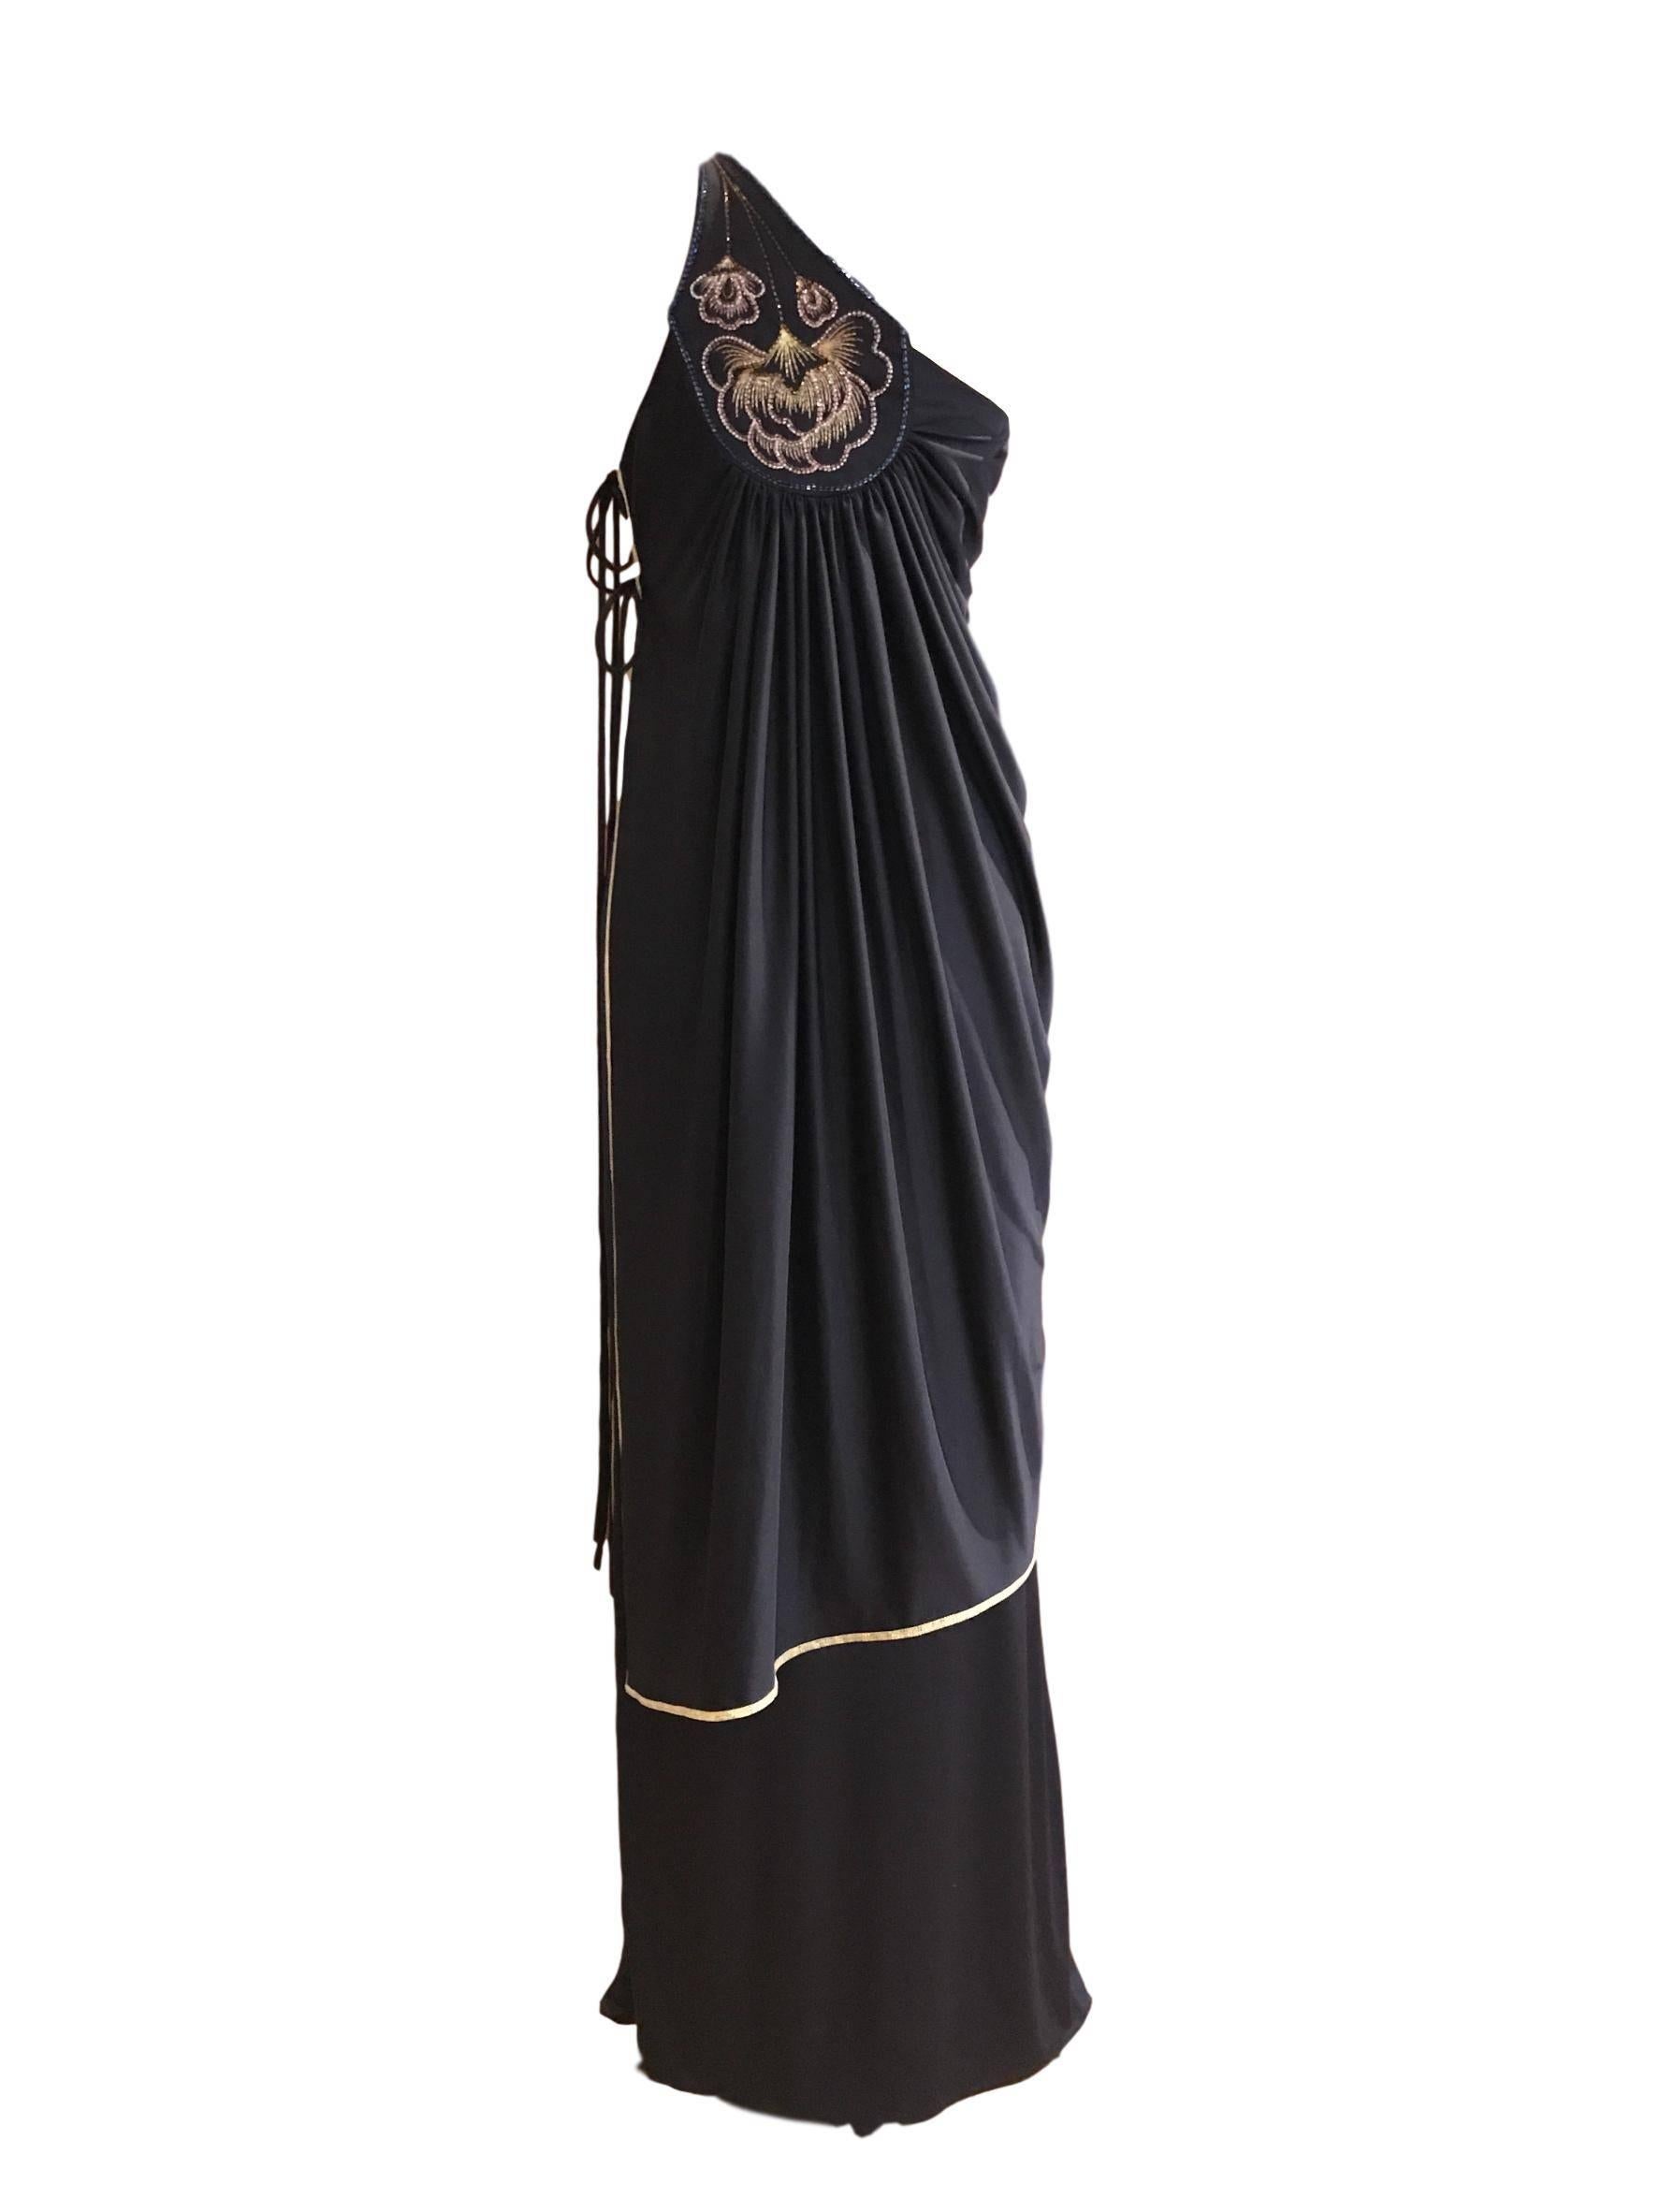 Superb Bill Gibb 2 piece jersey toga set. Maxi skirt and tunic with side fastening. Gold metallic trim and beaded feature in front and back. 
Skirt measures 26 waist and 42 inches length, tunic is 32 bust and 40 inch length.
Excellent condition 